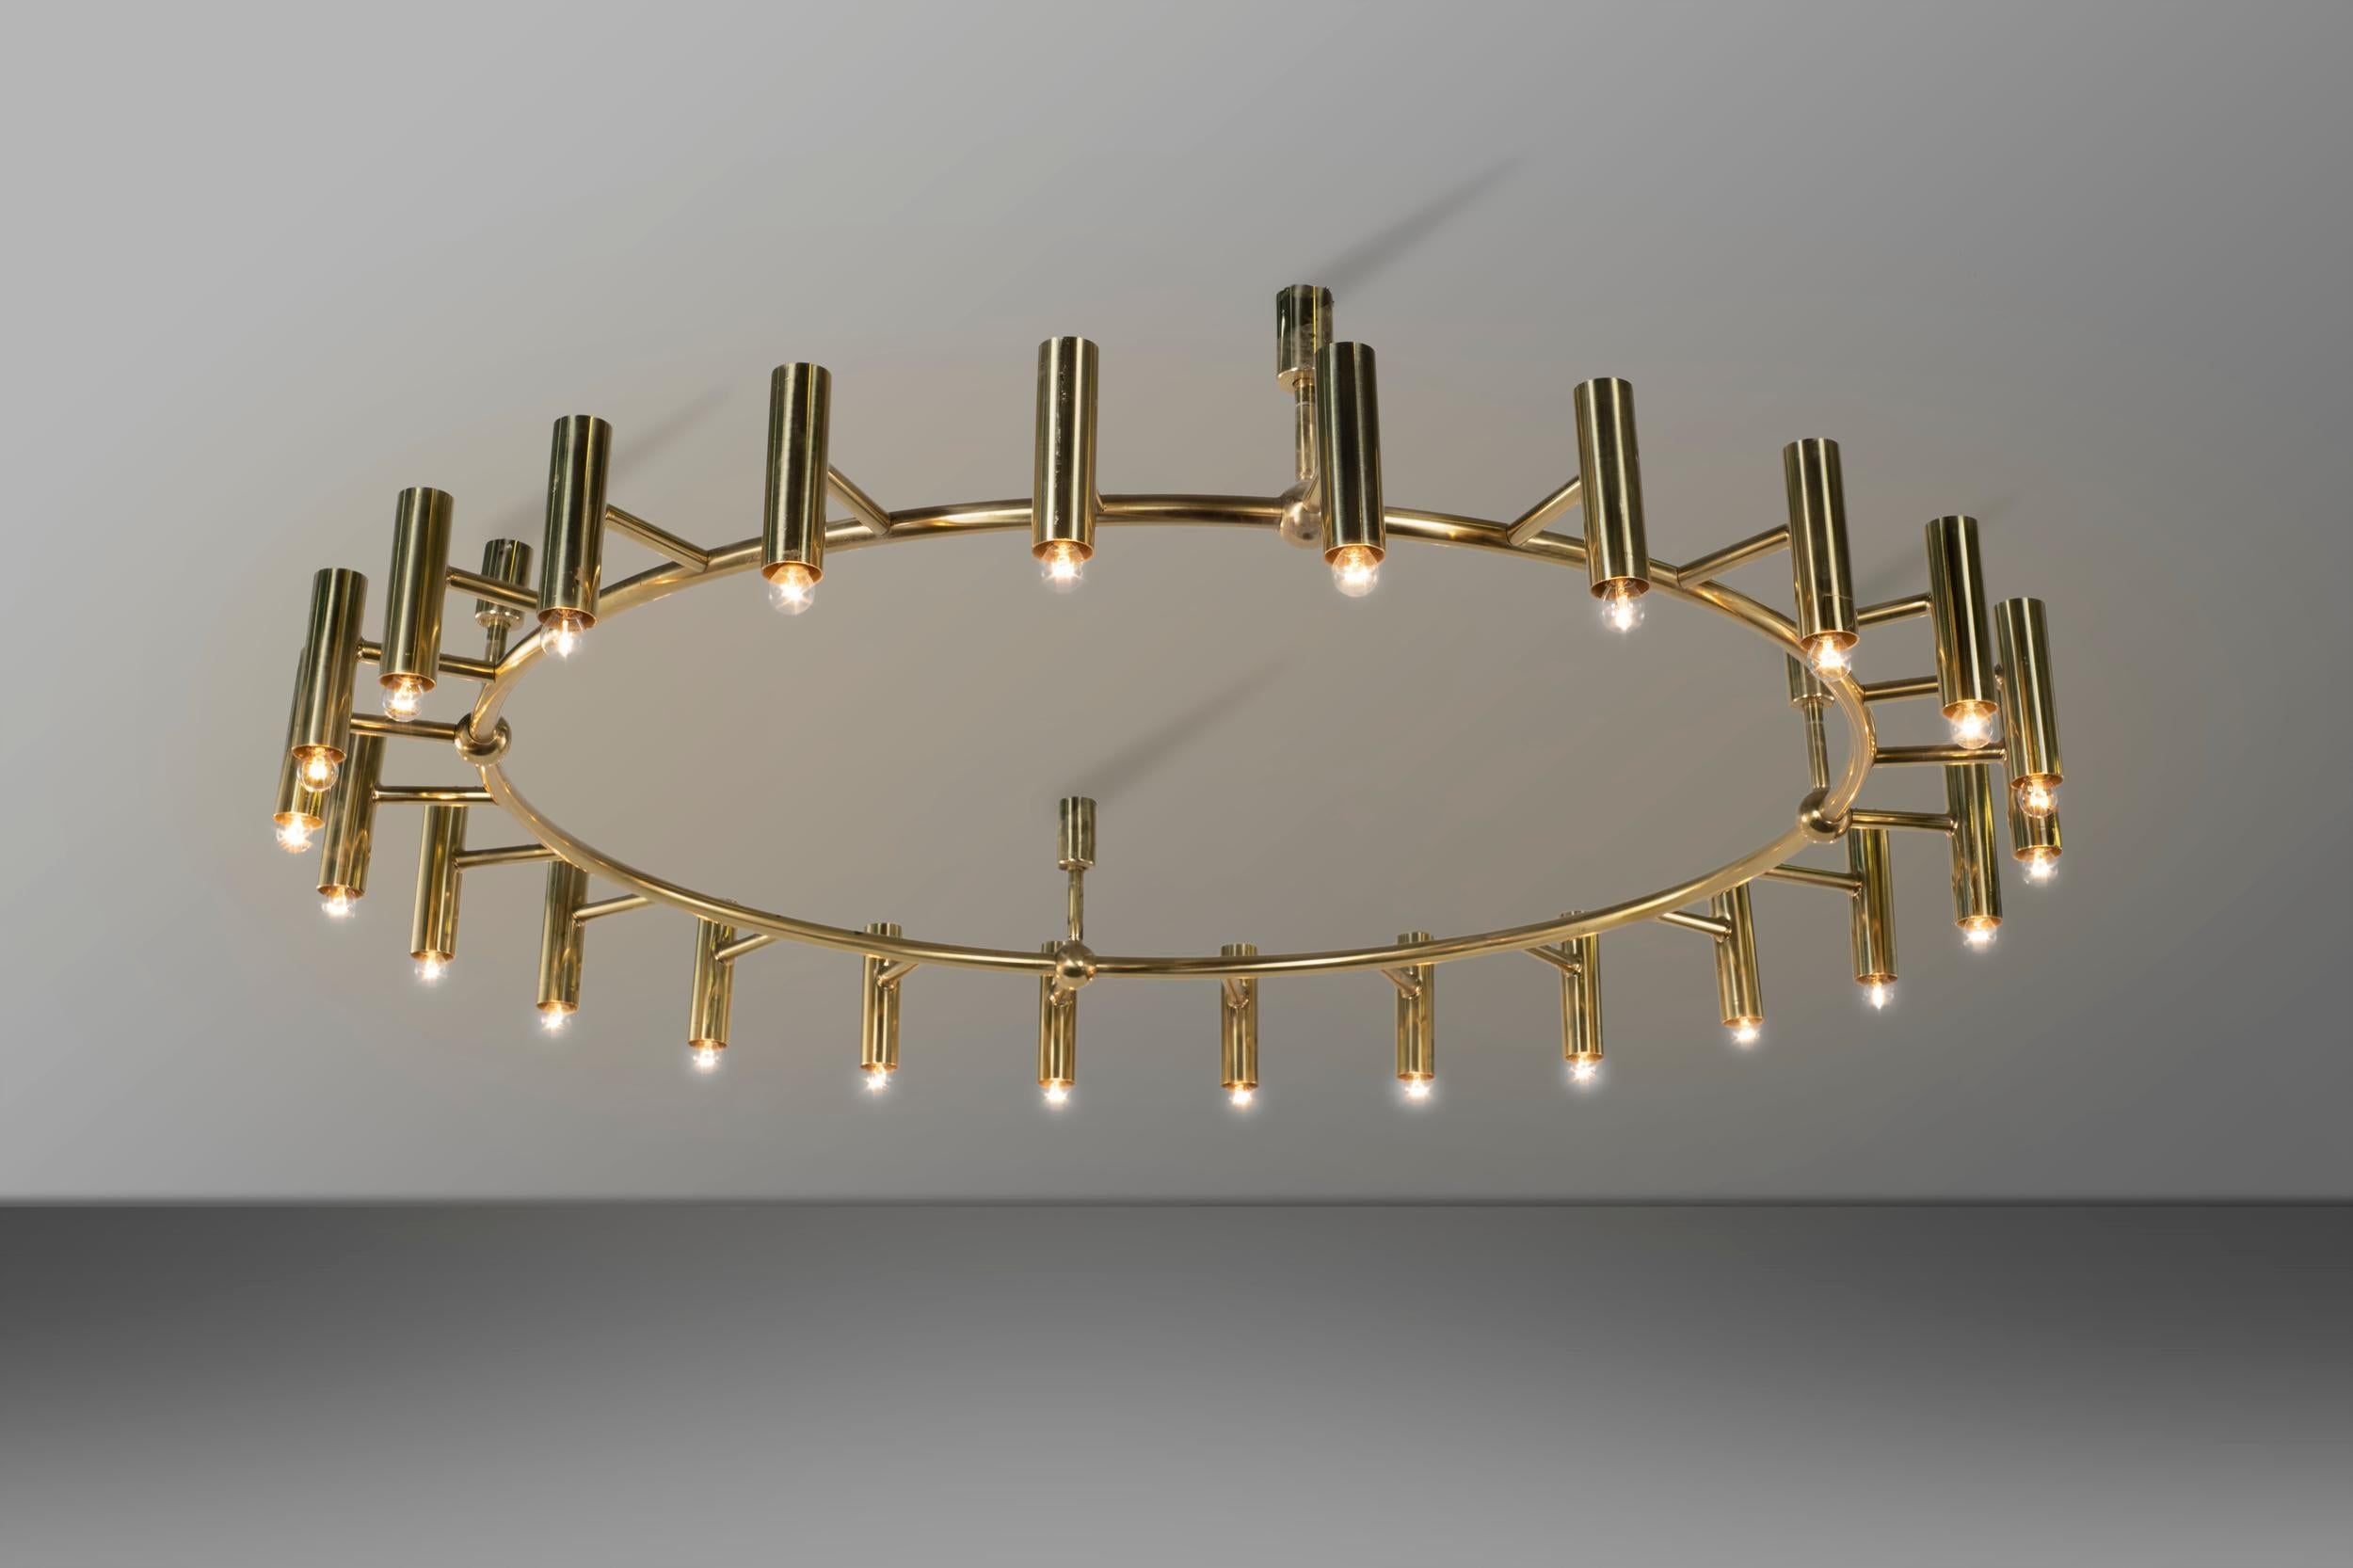 Big circular brass chandelier with 24 lights. This chandelier comes form the important restaurant designed by Ferruccio Laviani for Dolce&Gabbana in the early 2000 and closed around the 2015. The elegant but impressive shape gives the room a sober